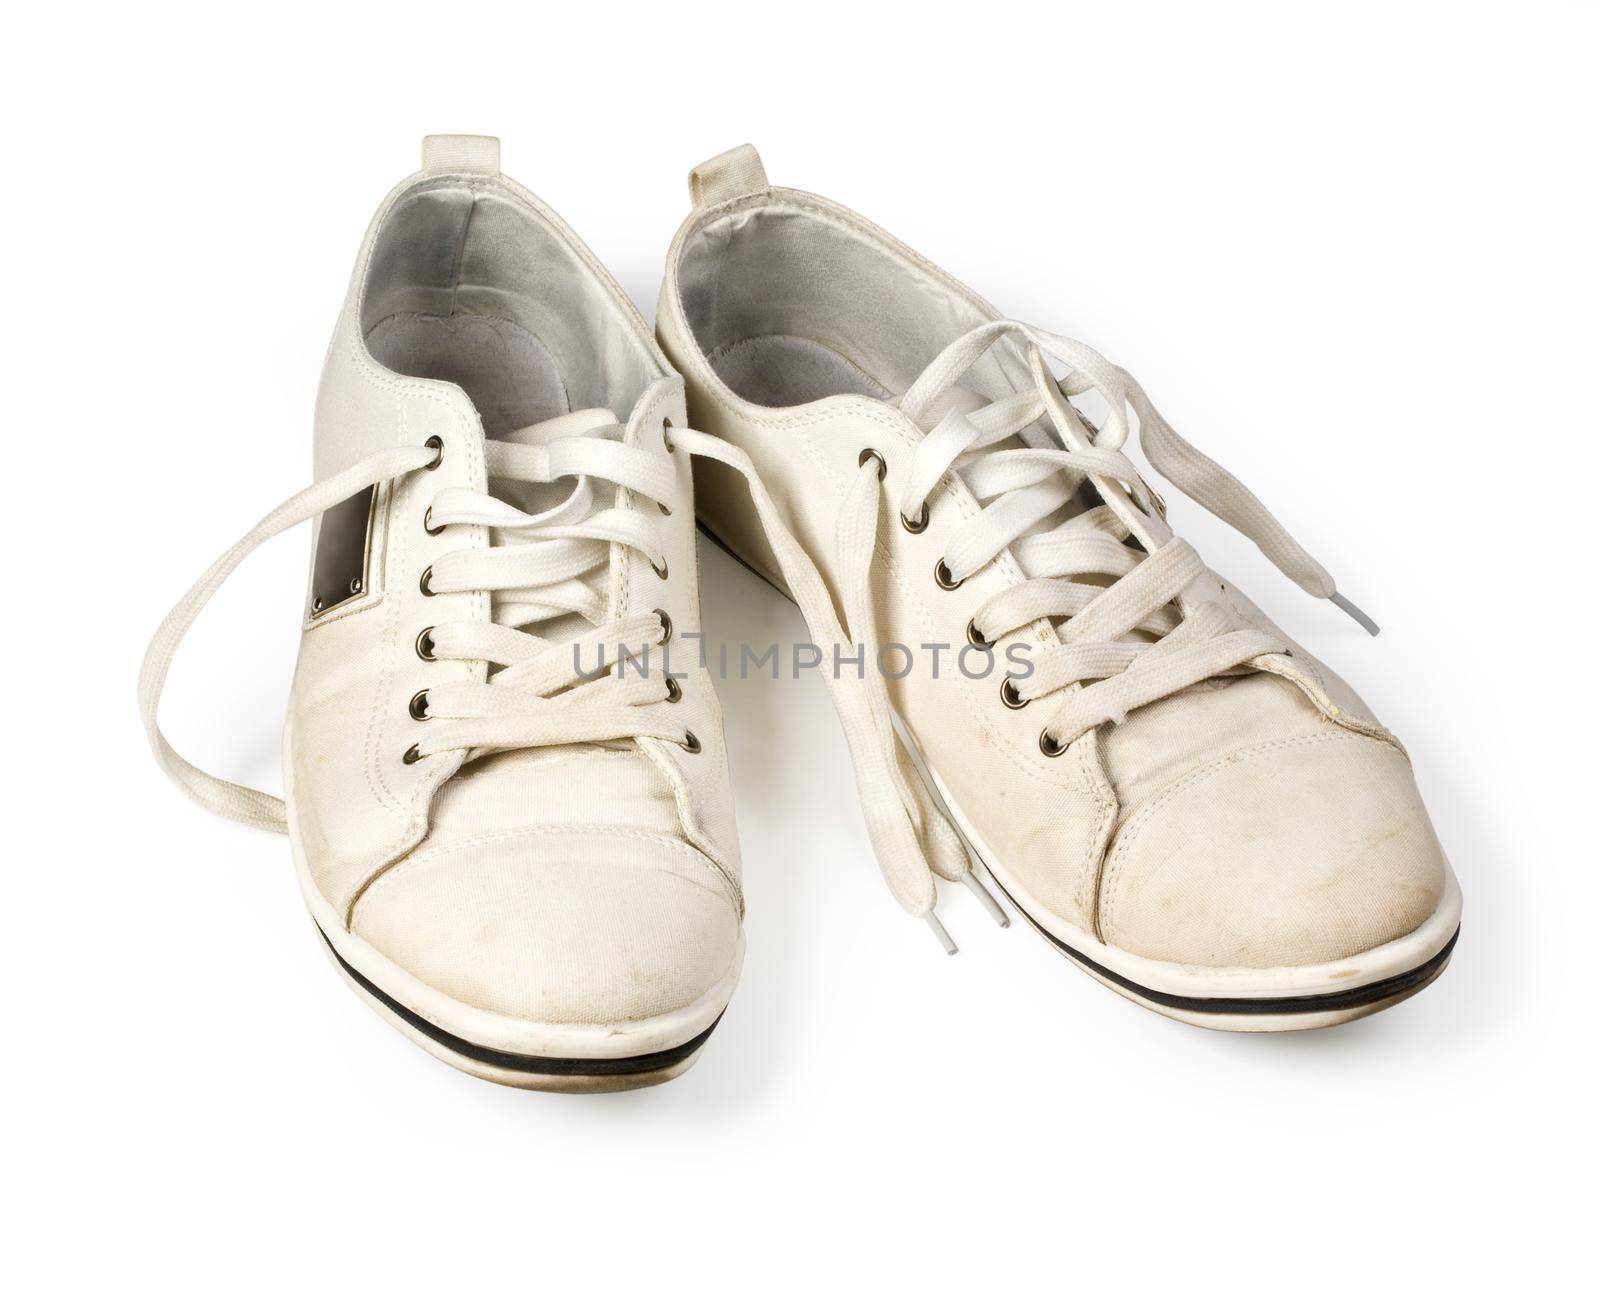 dirty white  shoes isolated on a white background